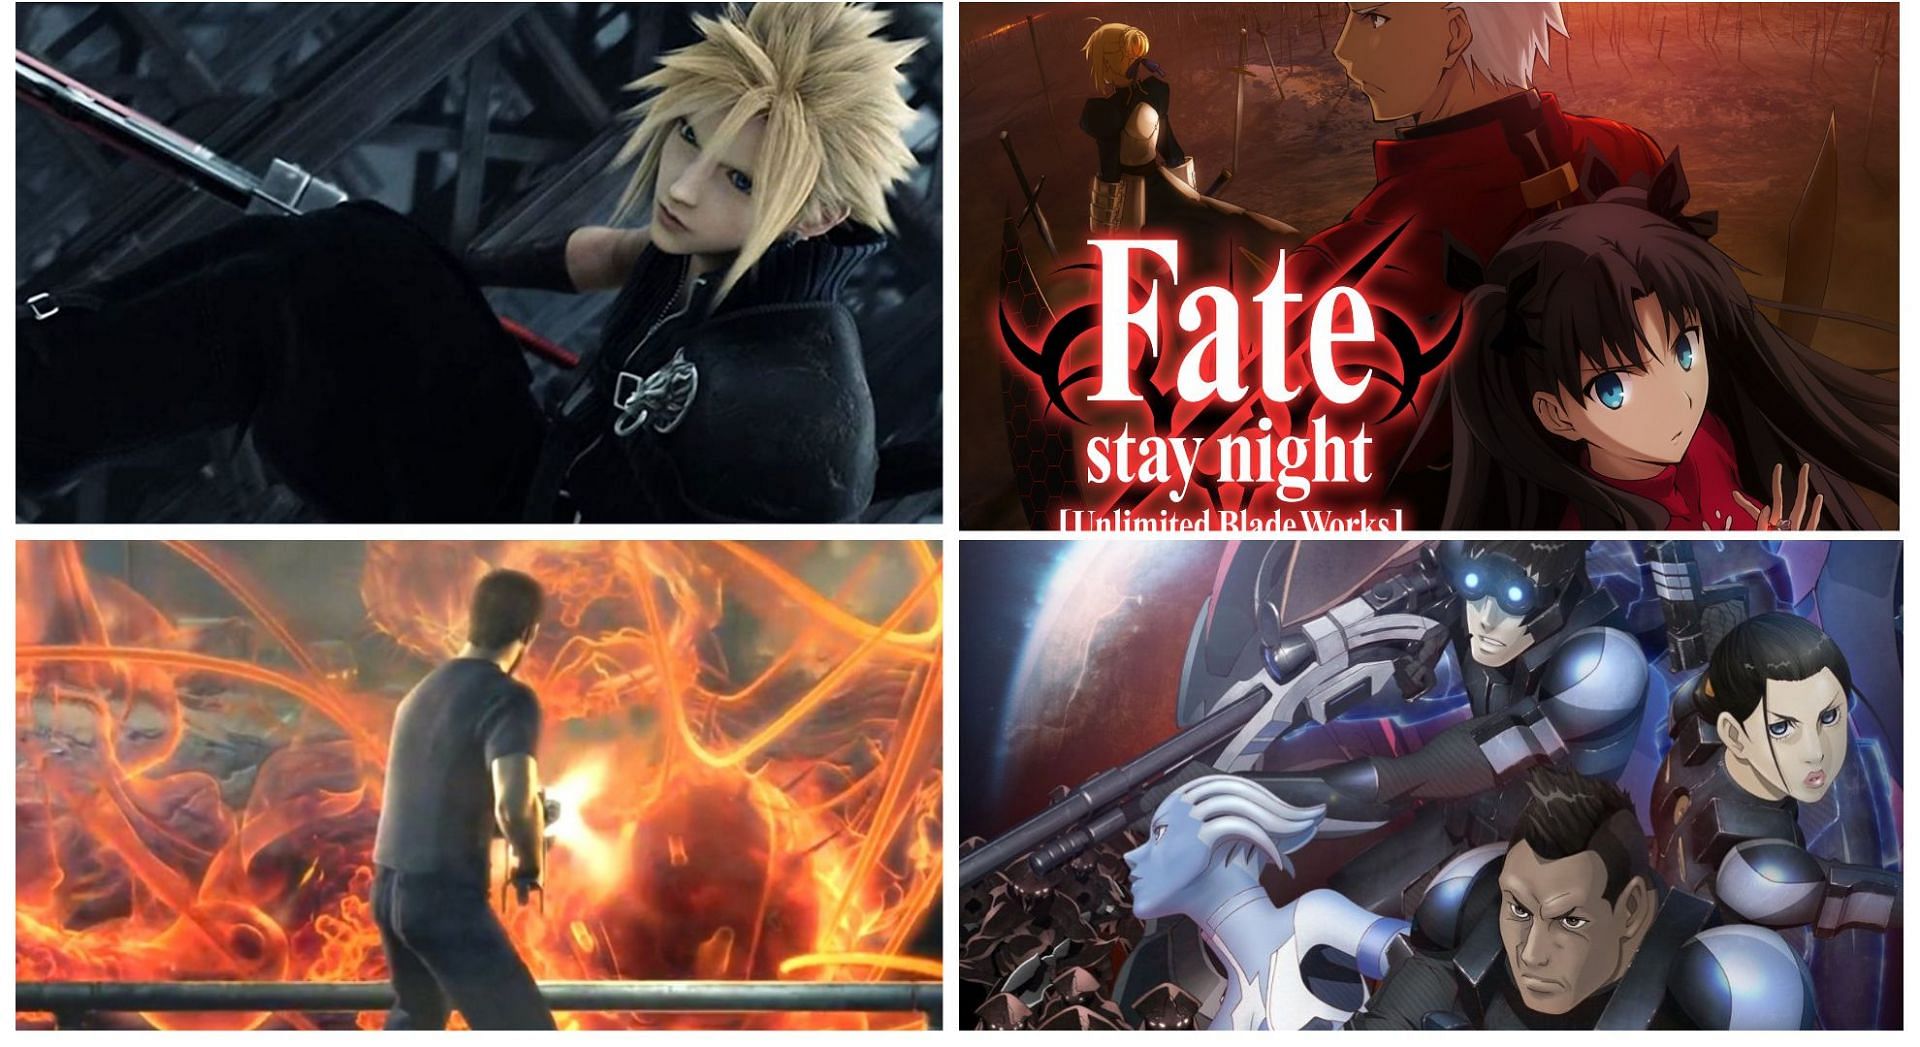 10 Best Games Based On Anime, According to Metacritic